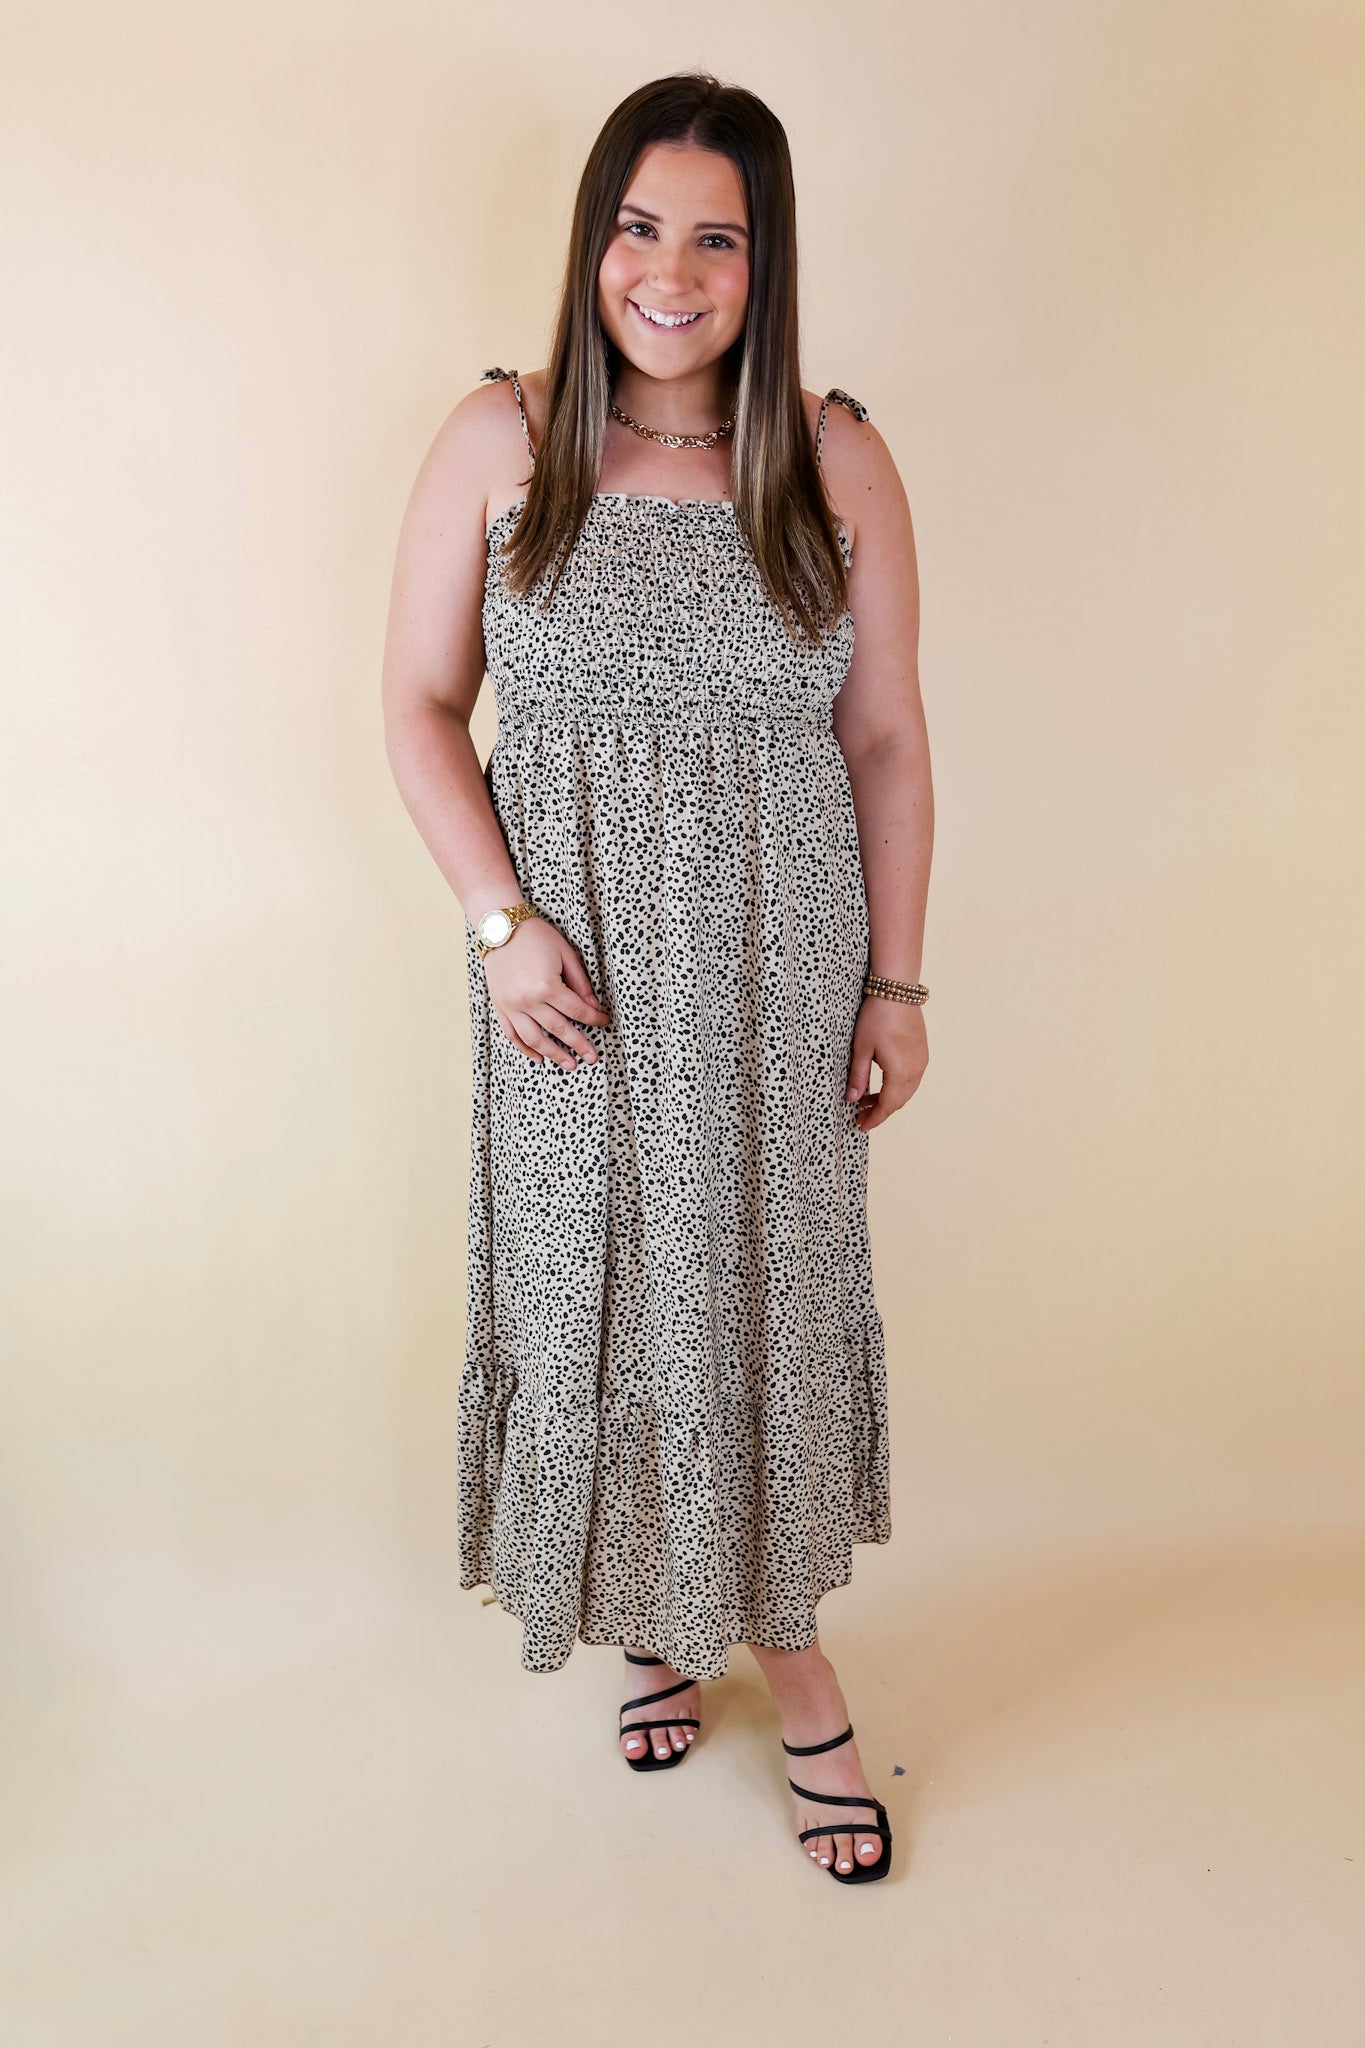 Wild Thoughts Dotted Print Maxi Dress with Spaghetti Straps in Taupe - Giddy Up Glamour Boutique